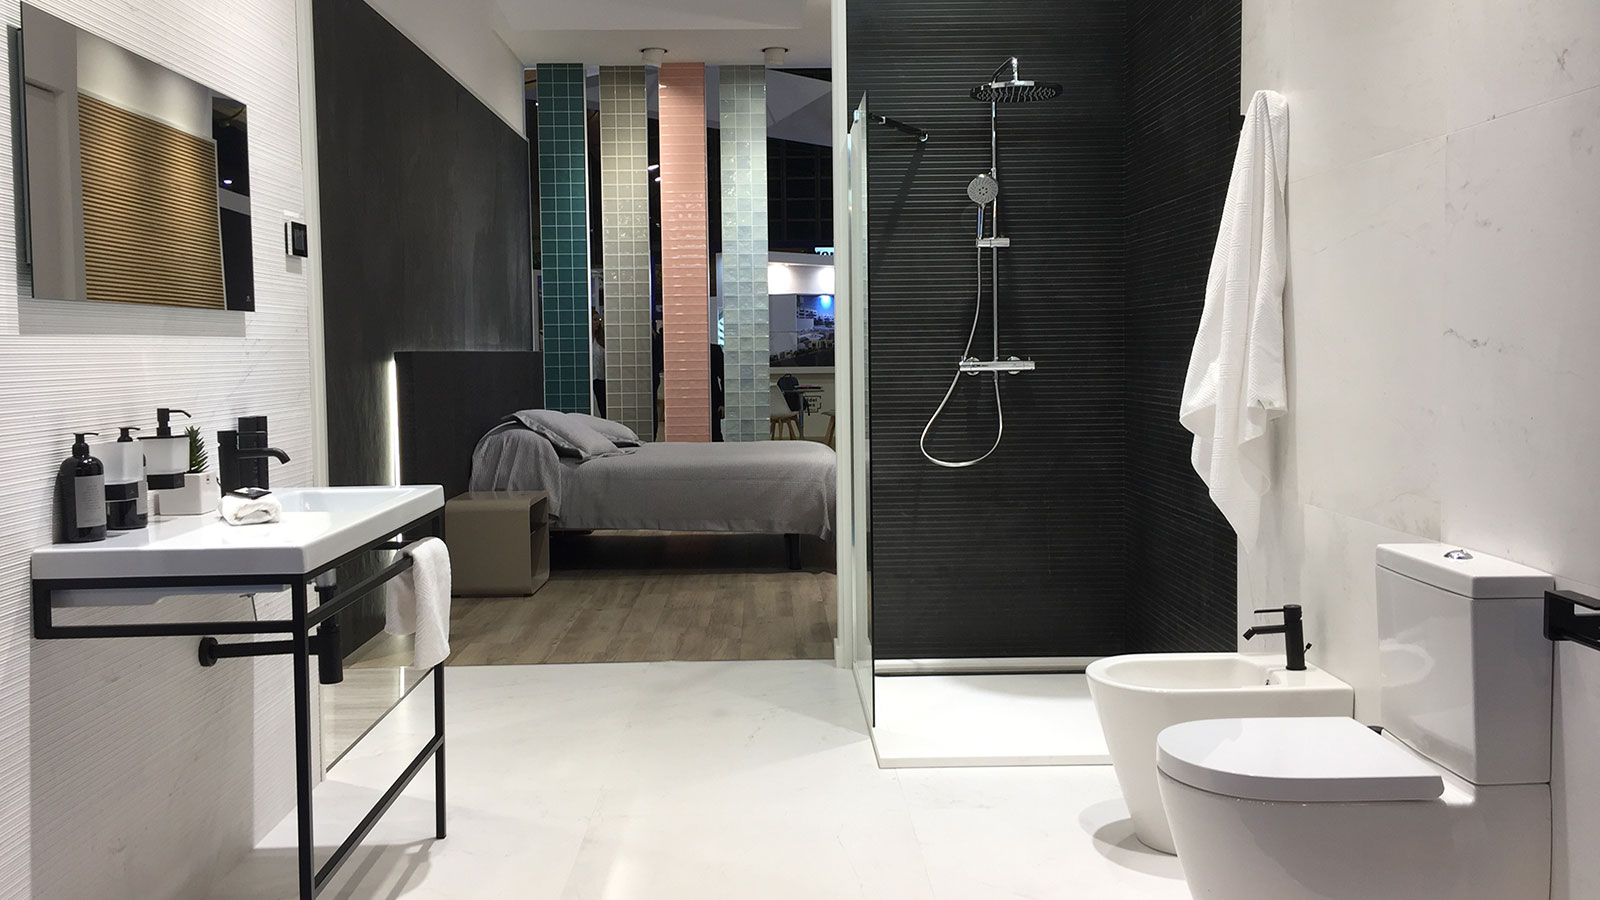 The PORCELANOSA Group strengthens its national presence at the Mediterranean Real Estate Exhibition in Málaga